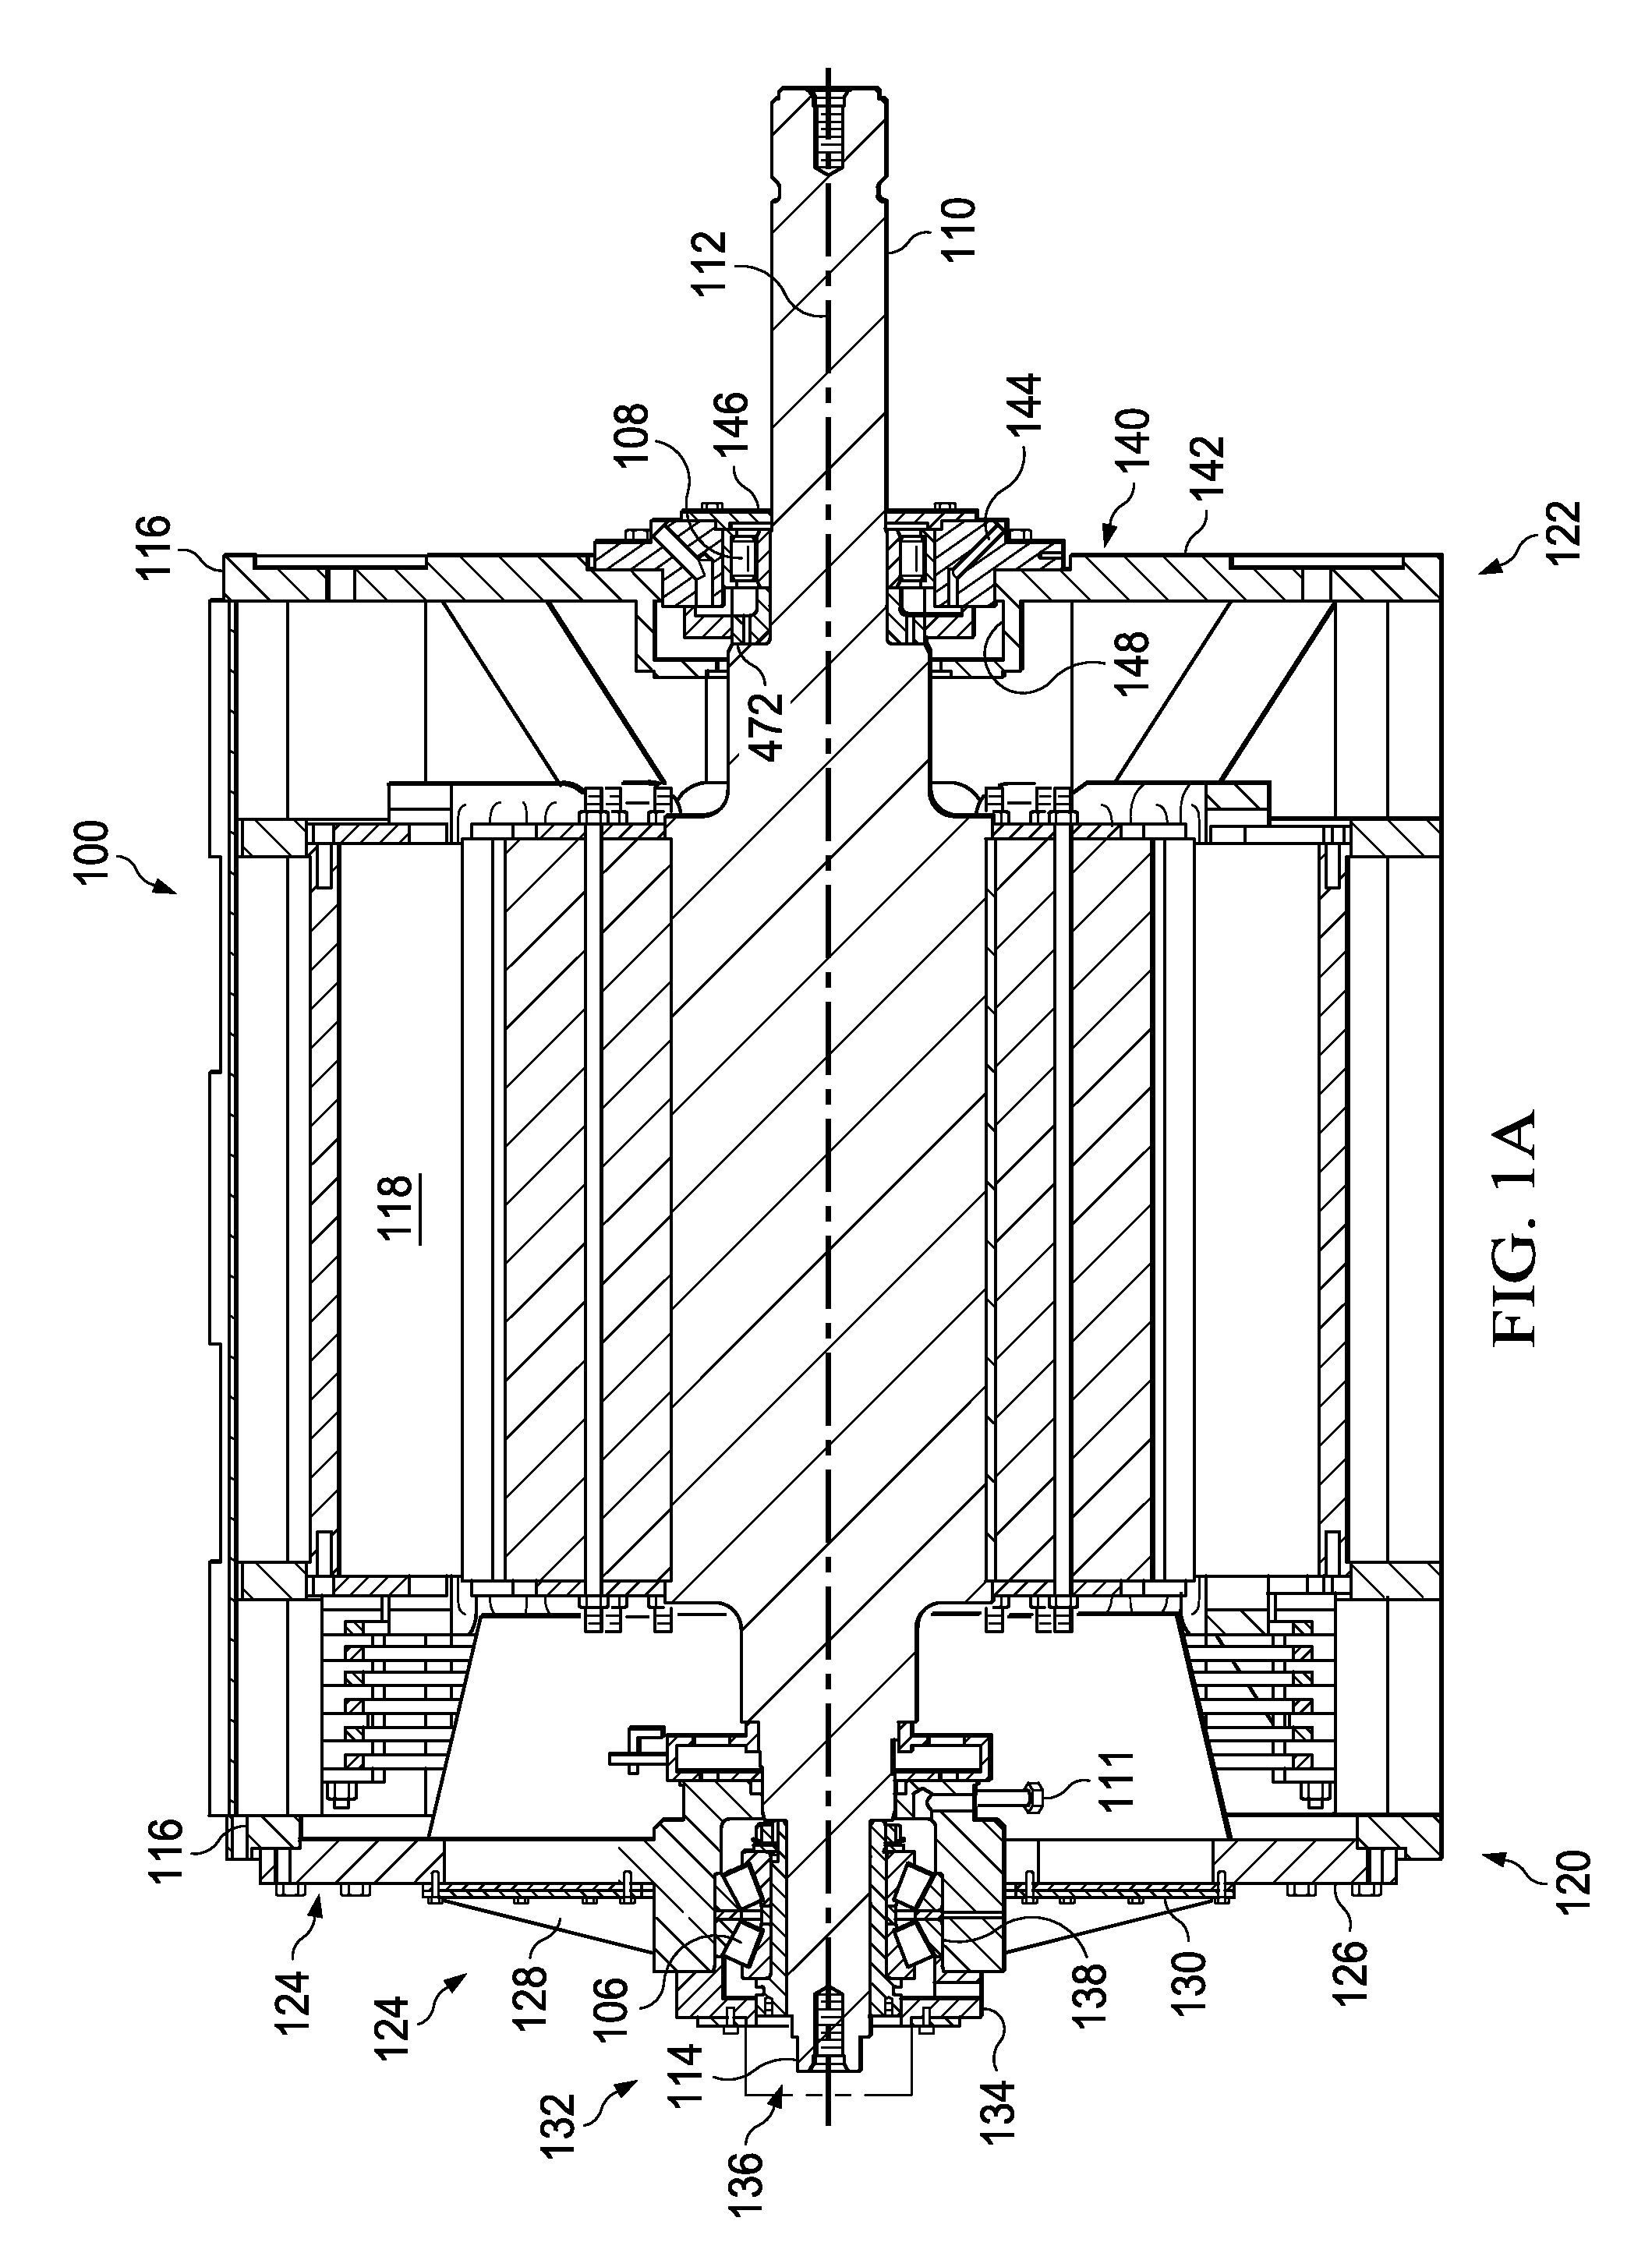 Systems, apparatuses and methods for lifting, positioning and removing a bearing assembly from a shaft